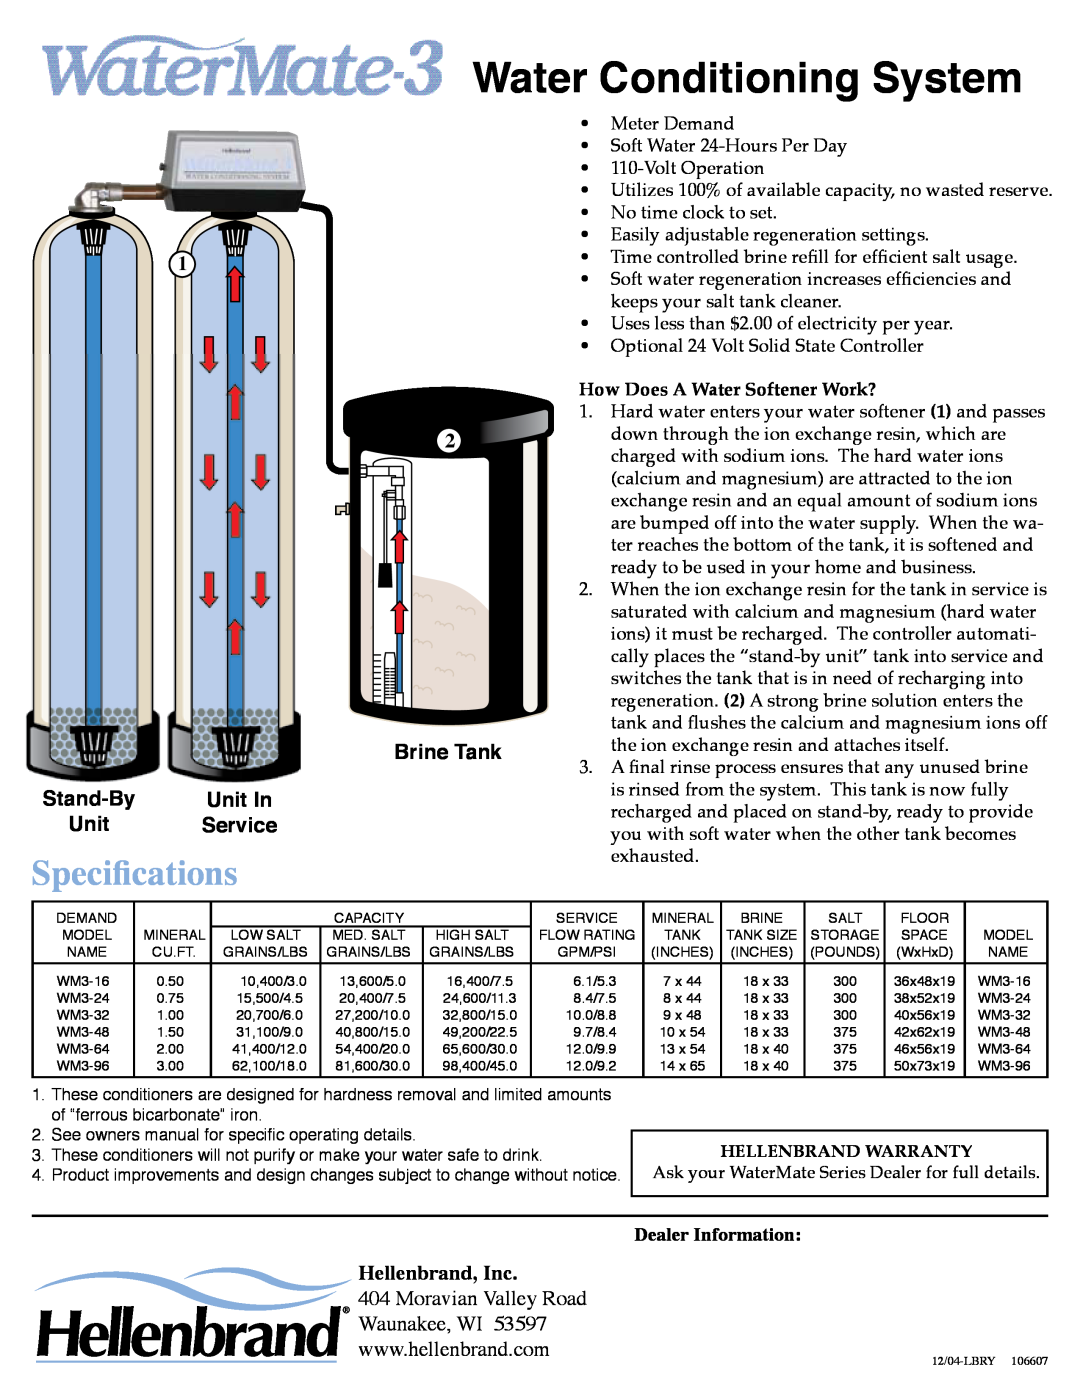 Argosy Research WaterMate 3 Water Conditioning System, Specifications, Unit In, Service, Brine Tank, Hellenbrand, Inc 